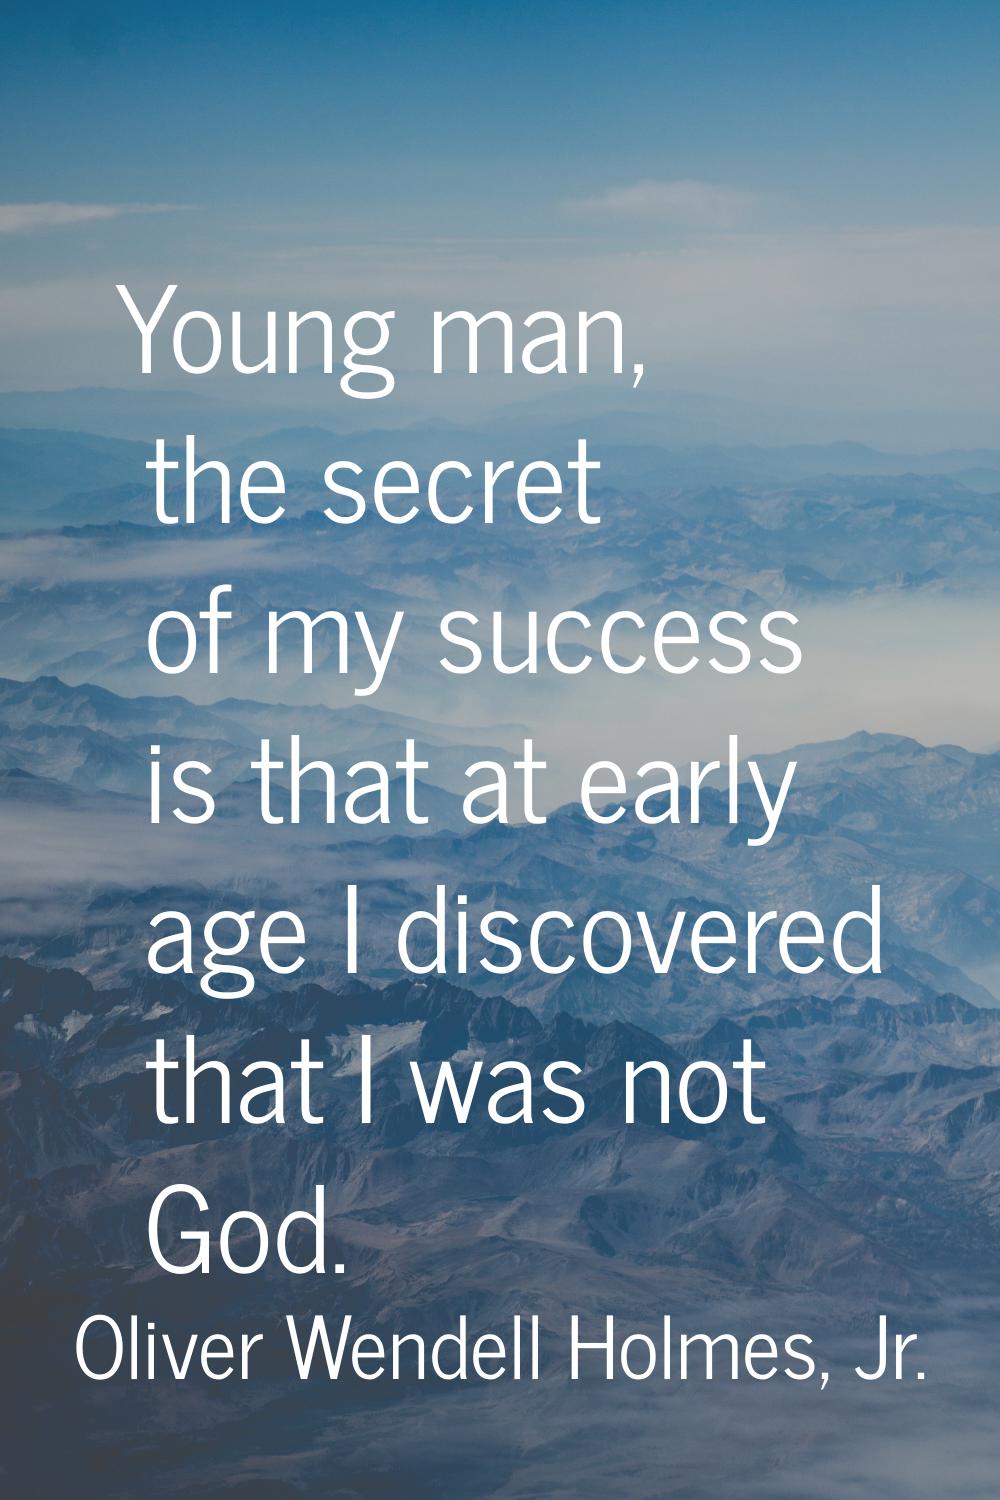 Young man, the secret of my success is that at early age I discovered that I was not God.